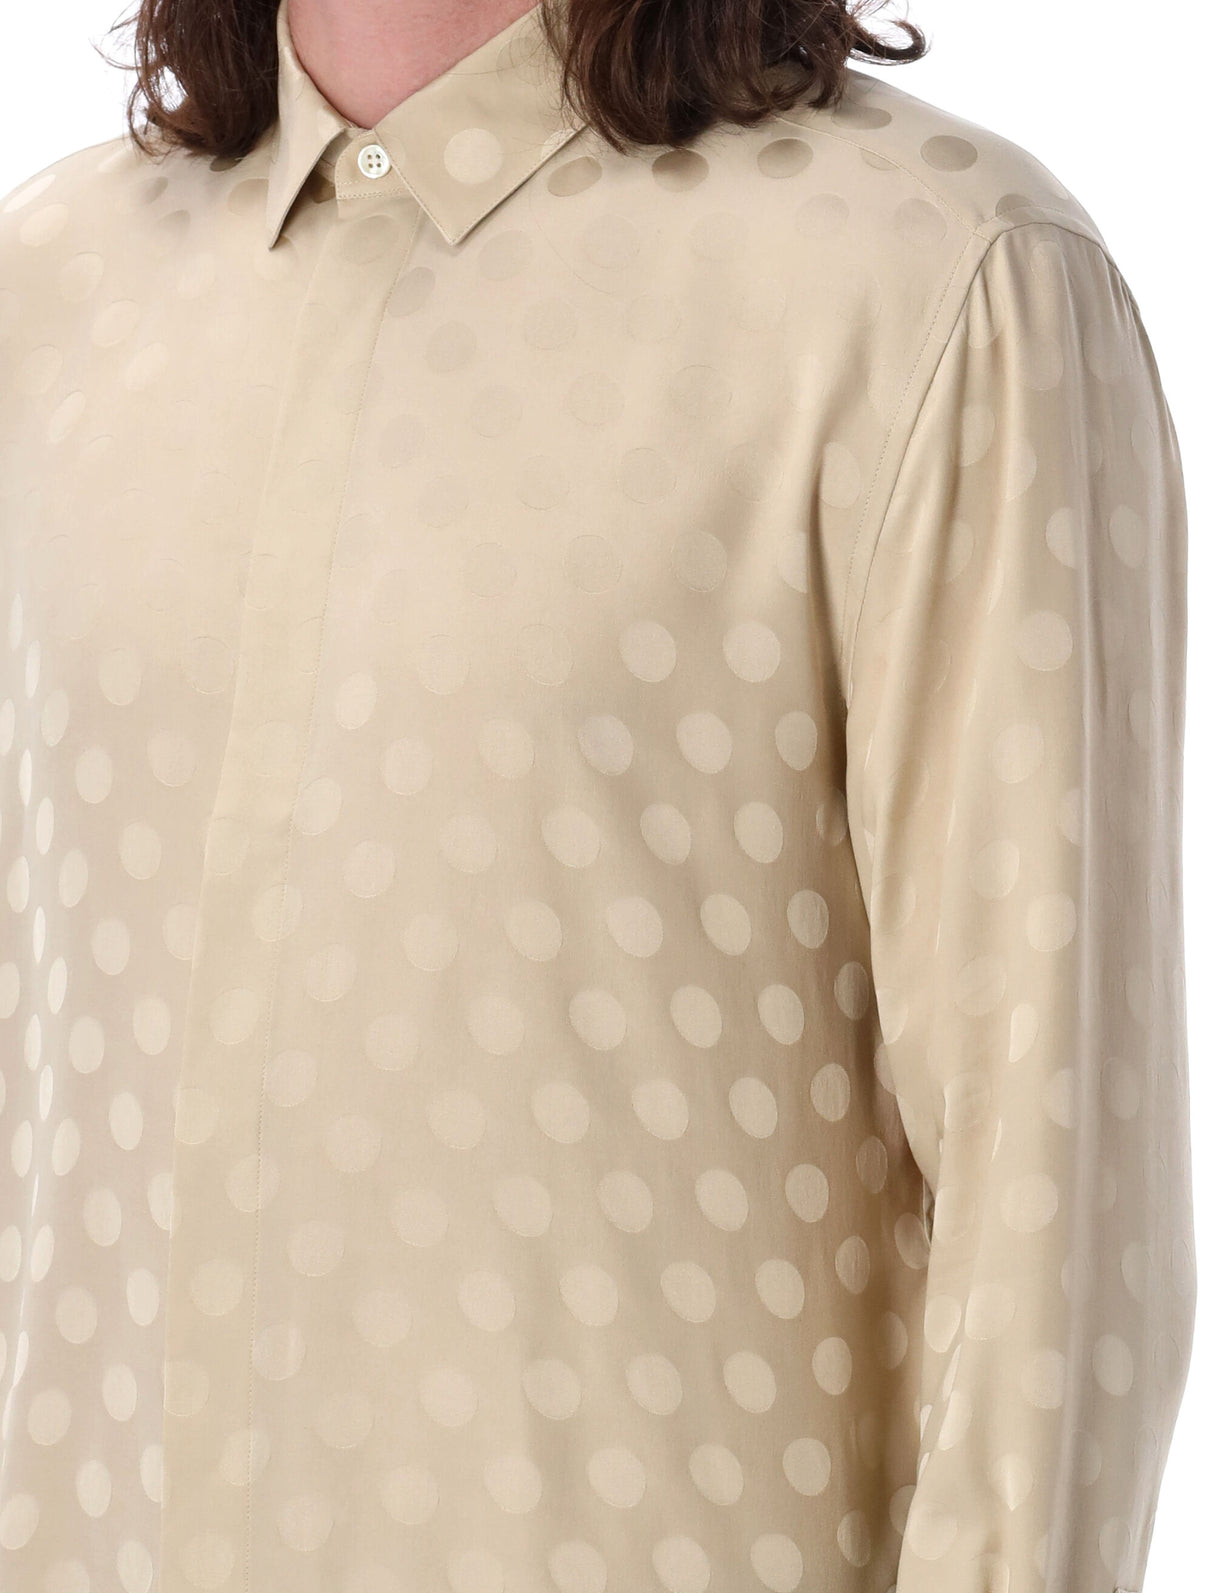 Dotted Silk Shirt for Men by Yves Saint Laurent